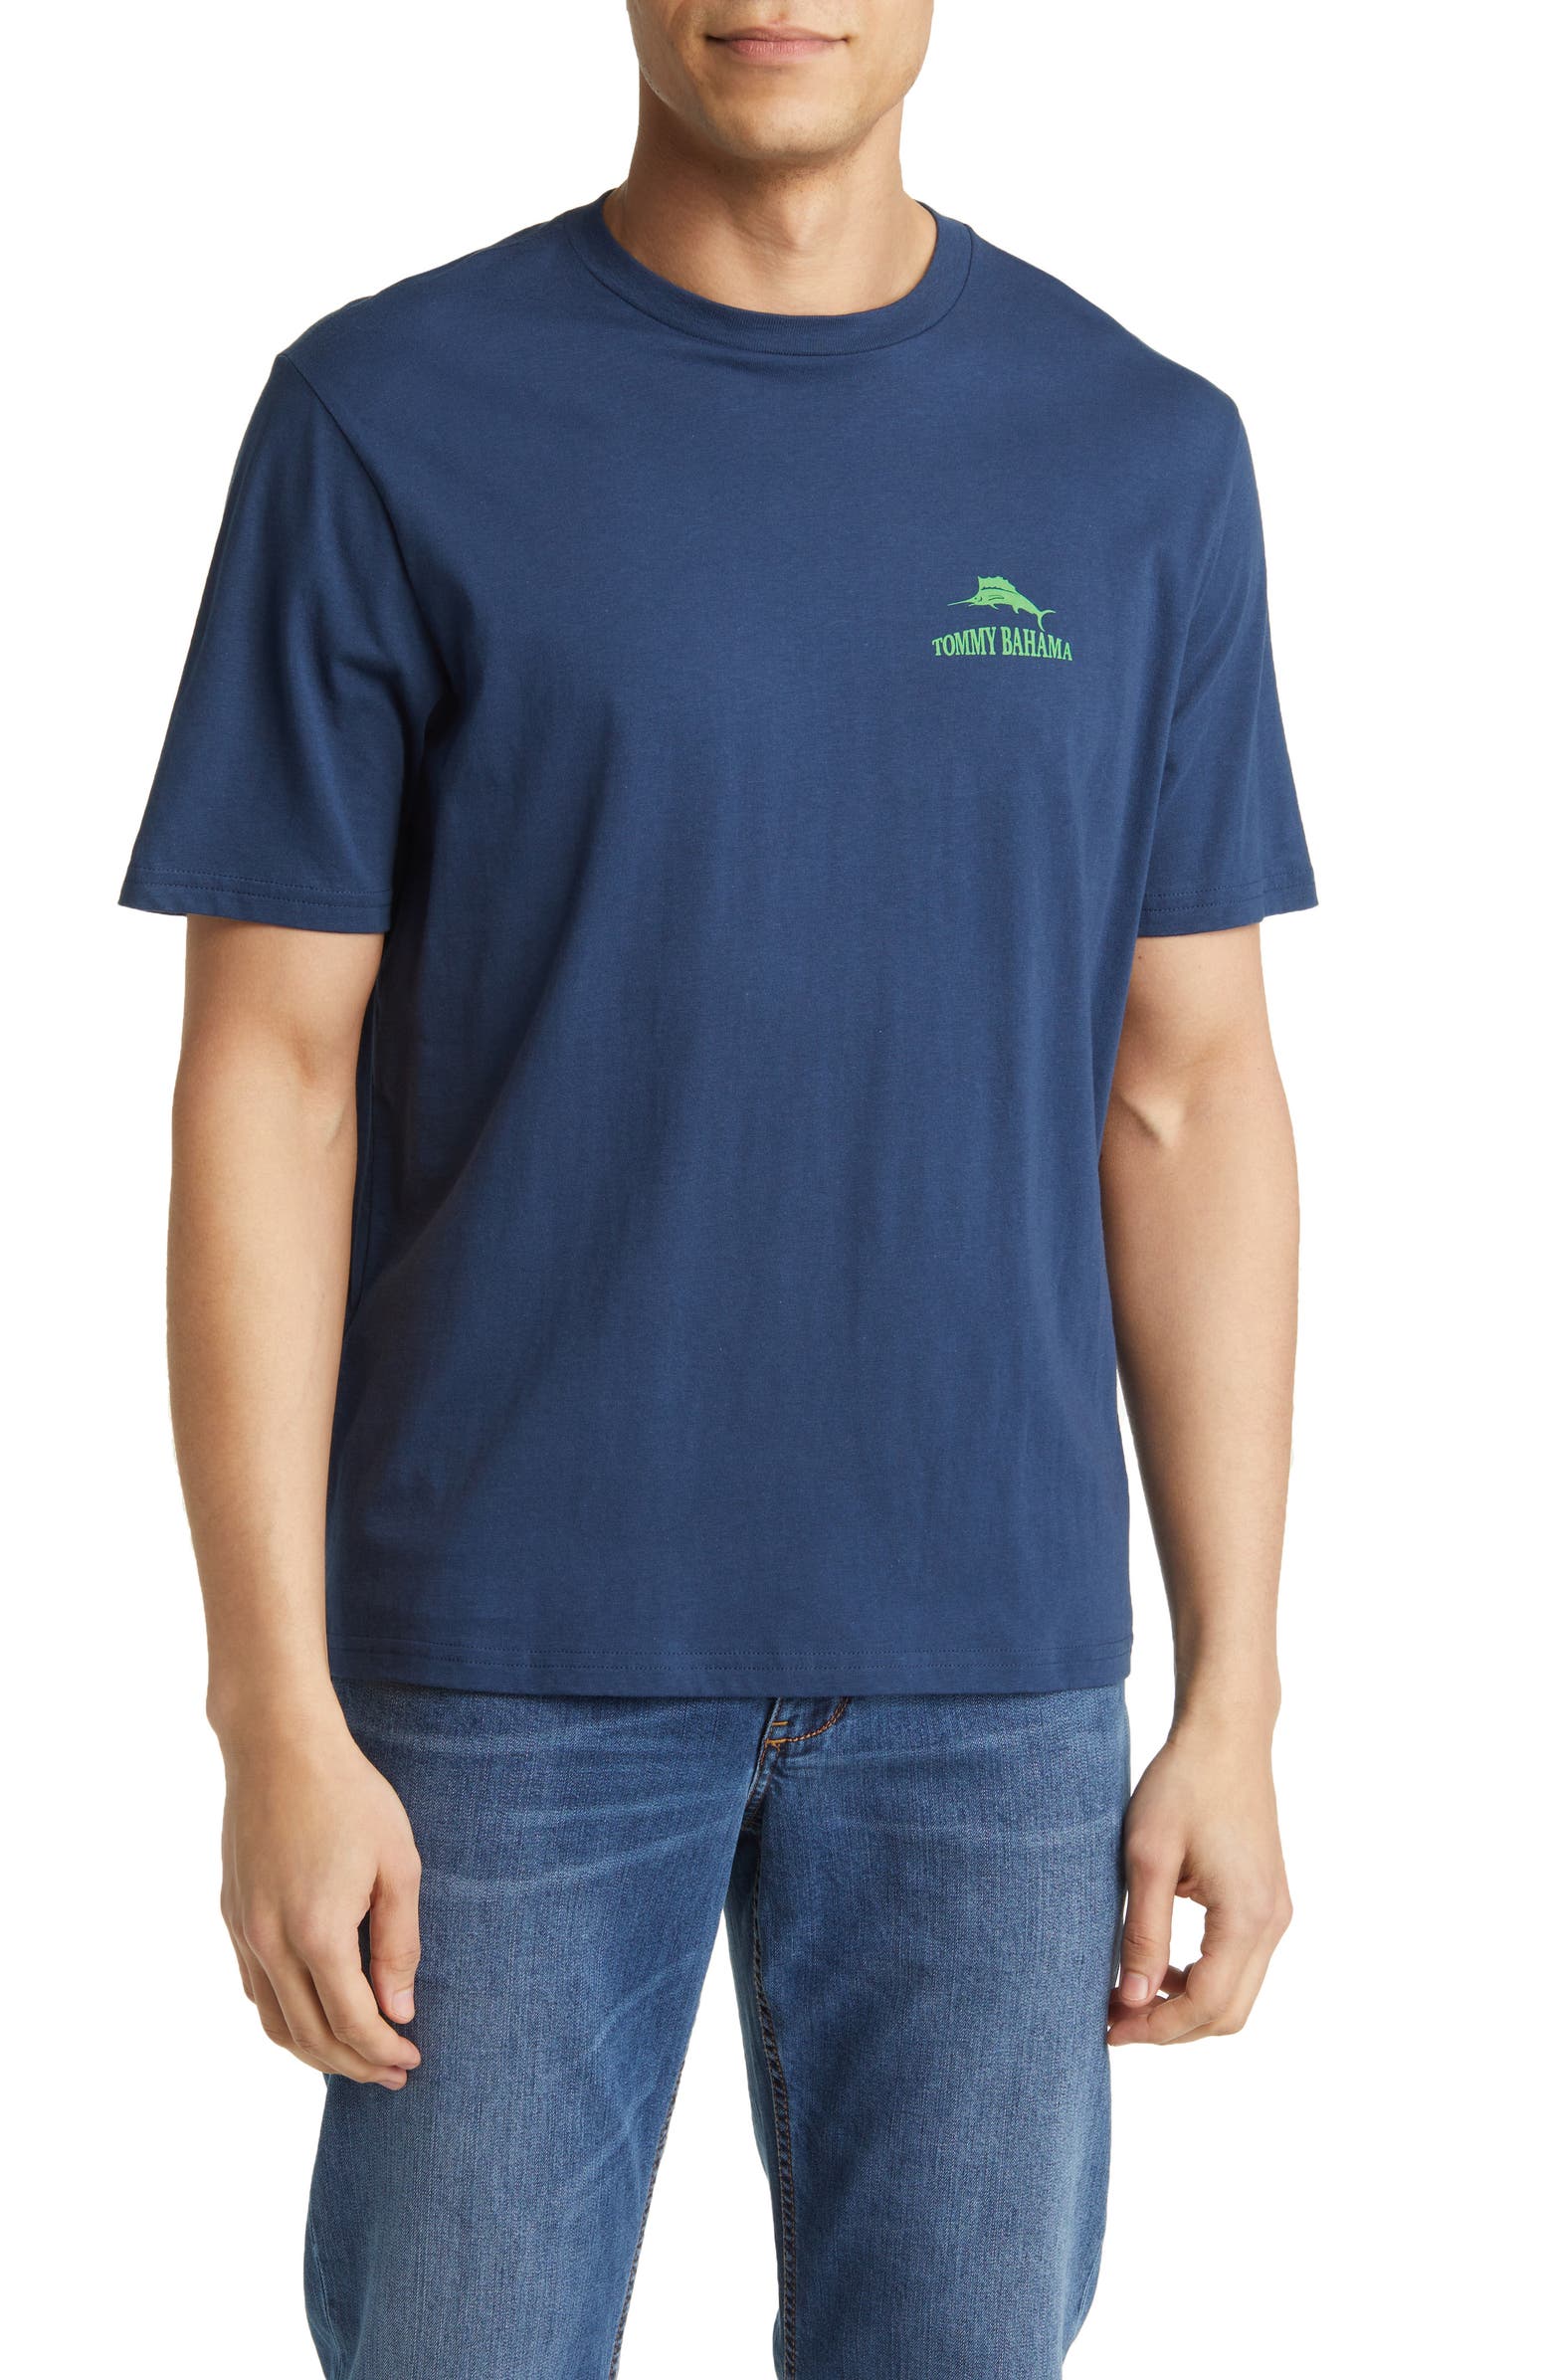 Tommy Bahama Grassy Conditions Graphic T-Shirt | Nordstrom